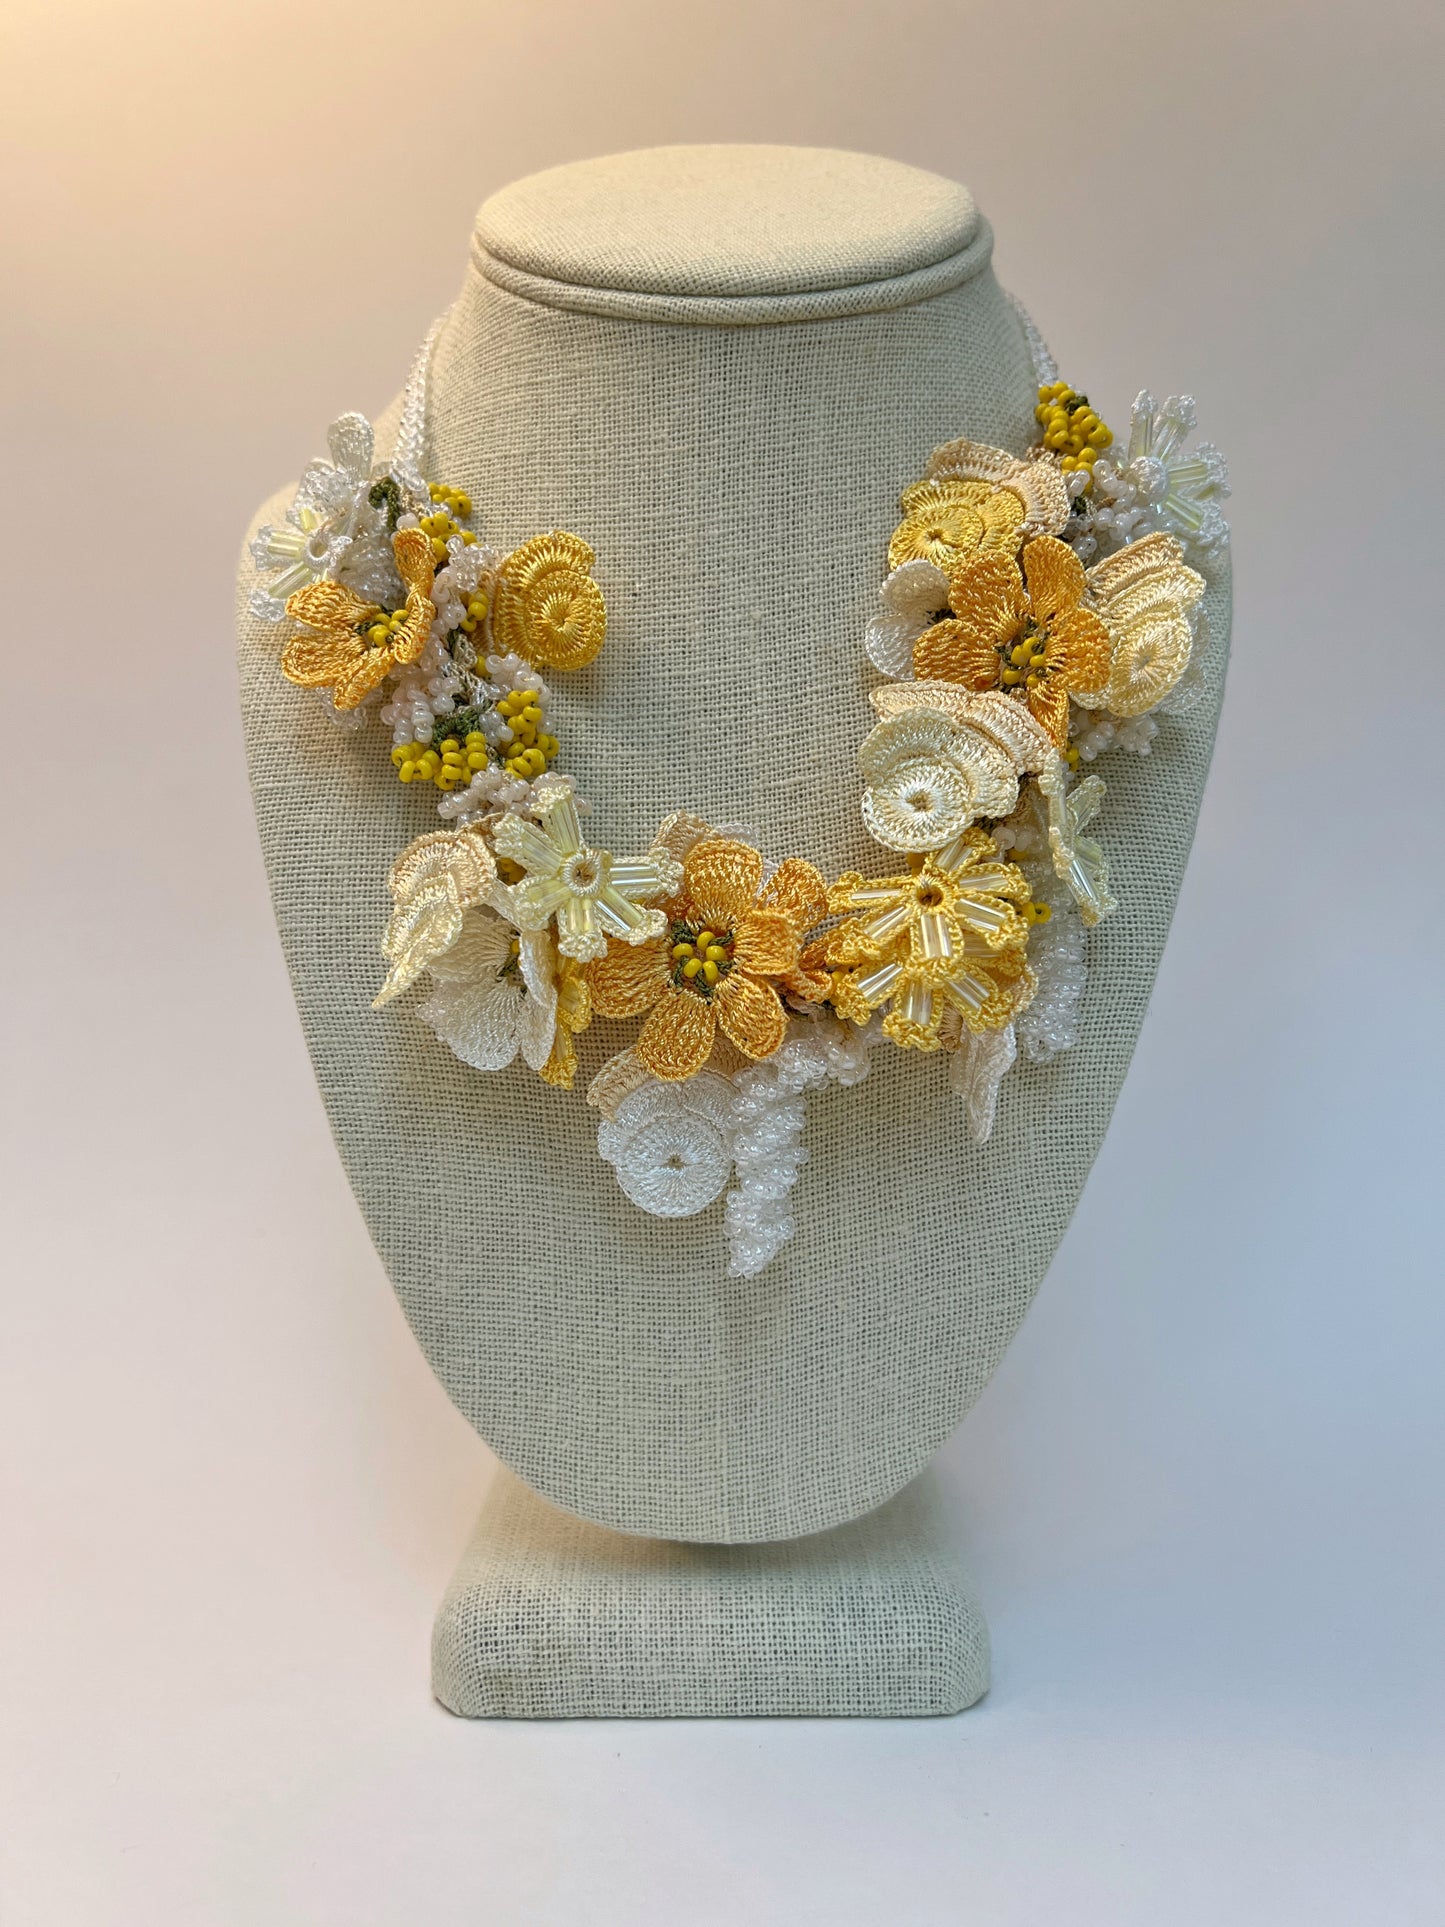 The Fabulous Handmade Turkish Necklace in Buttercup